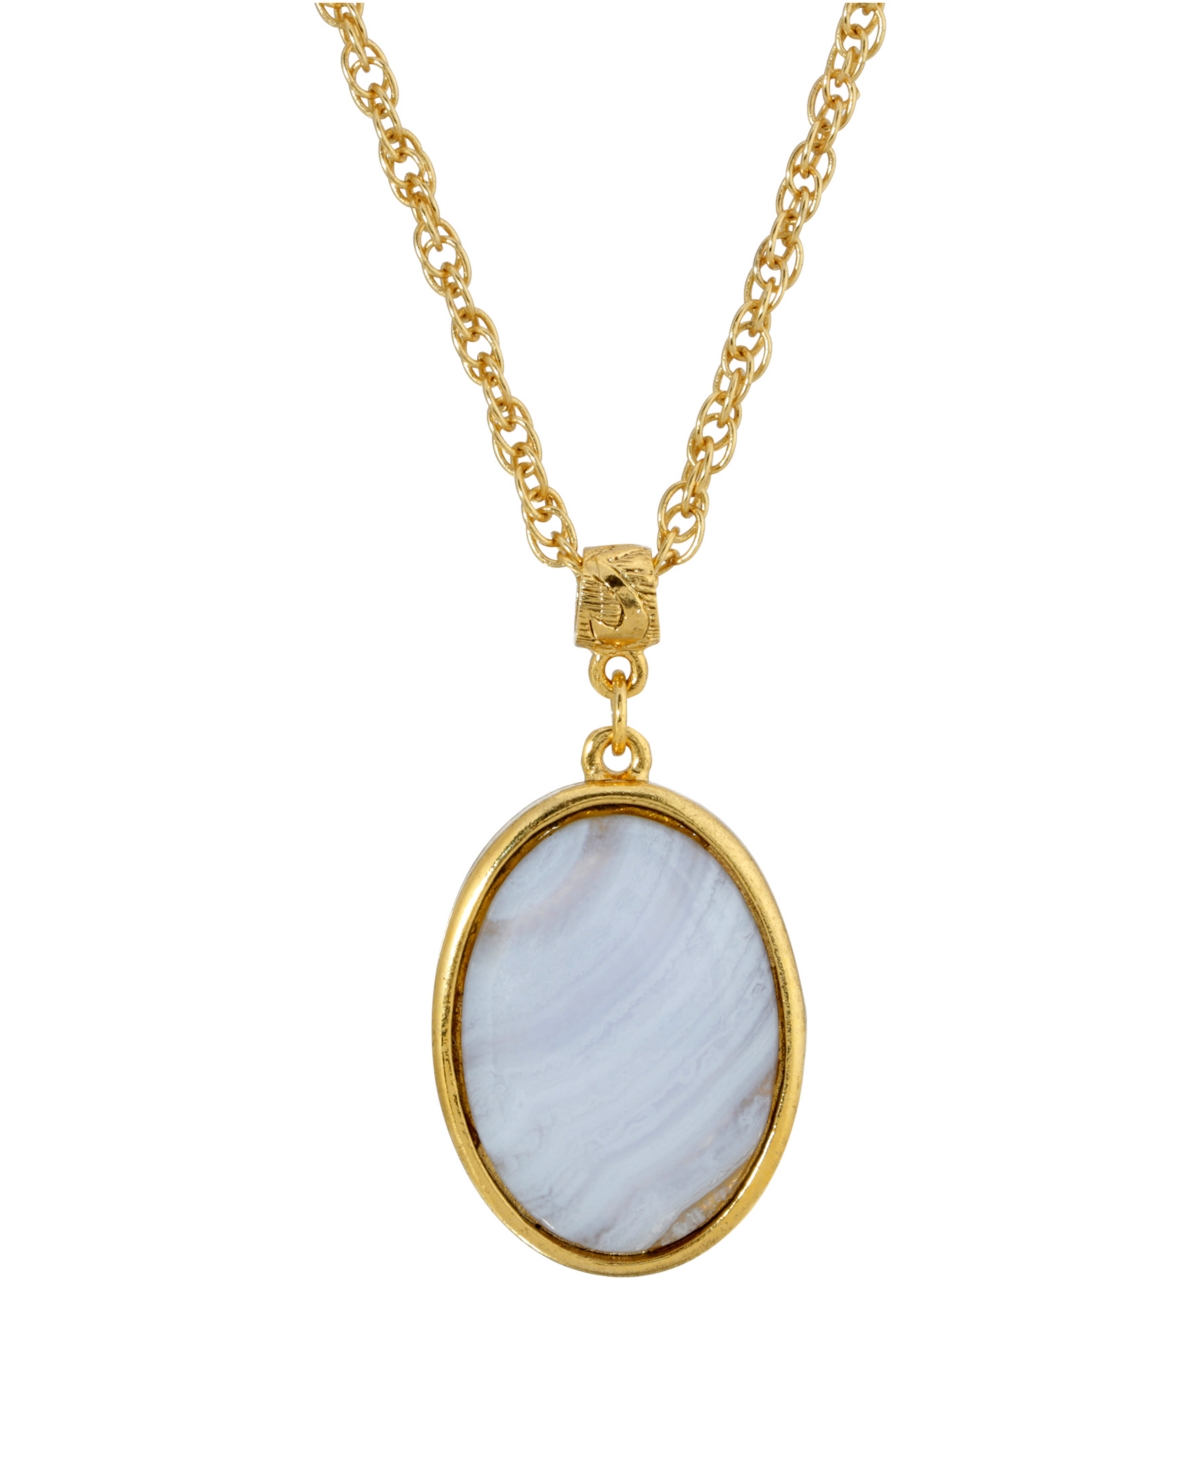 2028 14k Gold Plated Semi Precious Lace Agate Oval Pendant Necklace In Blue